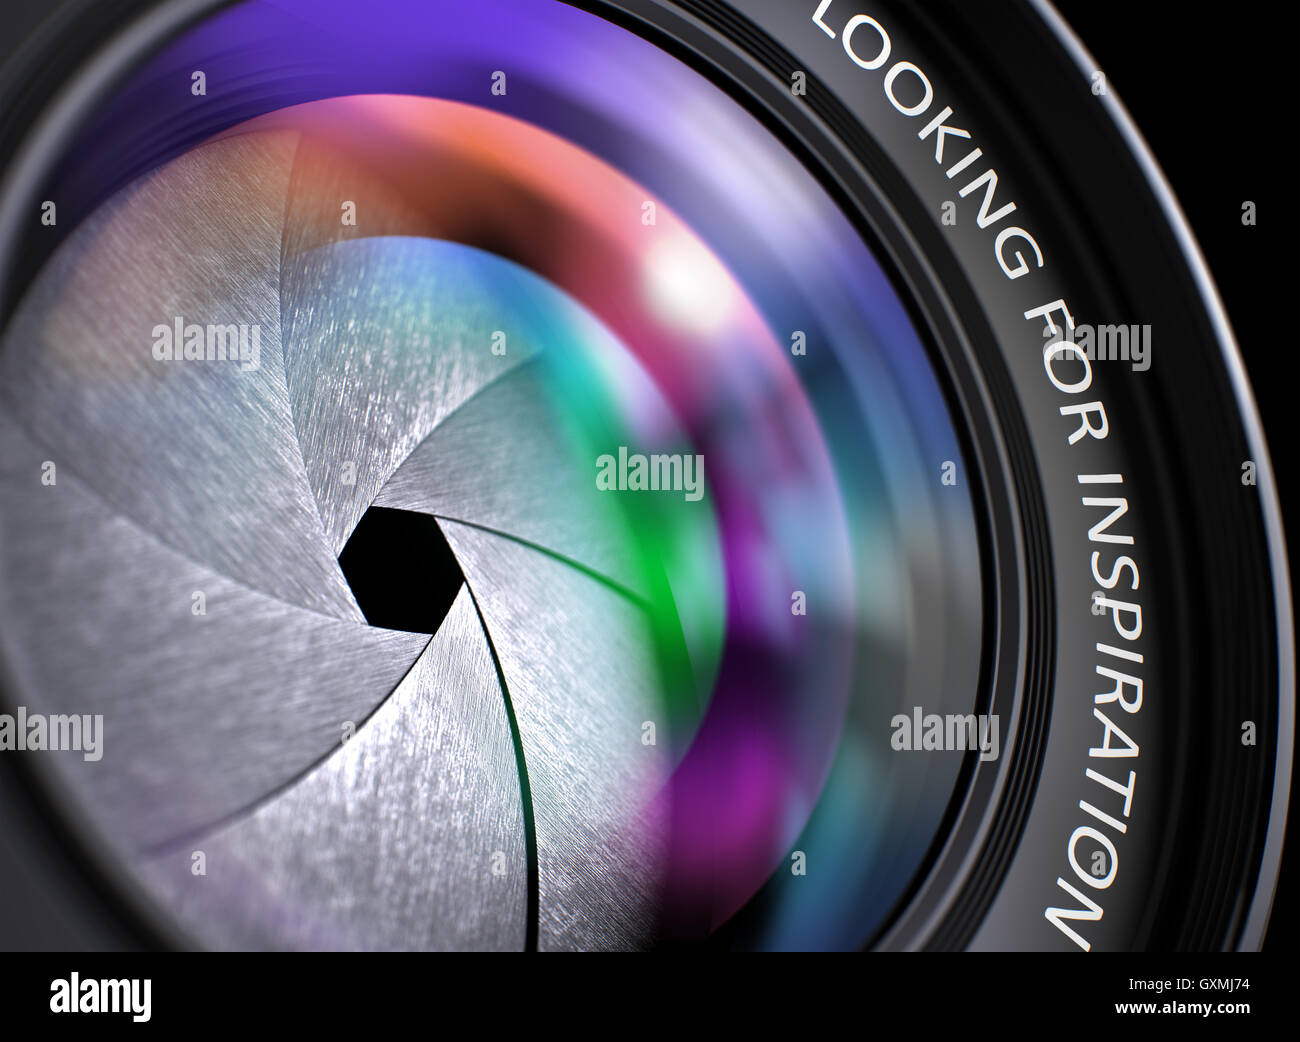 Looking For Inspiration Concept on Lens of Digital Camera. 3D. Stock Photo